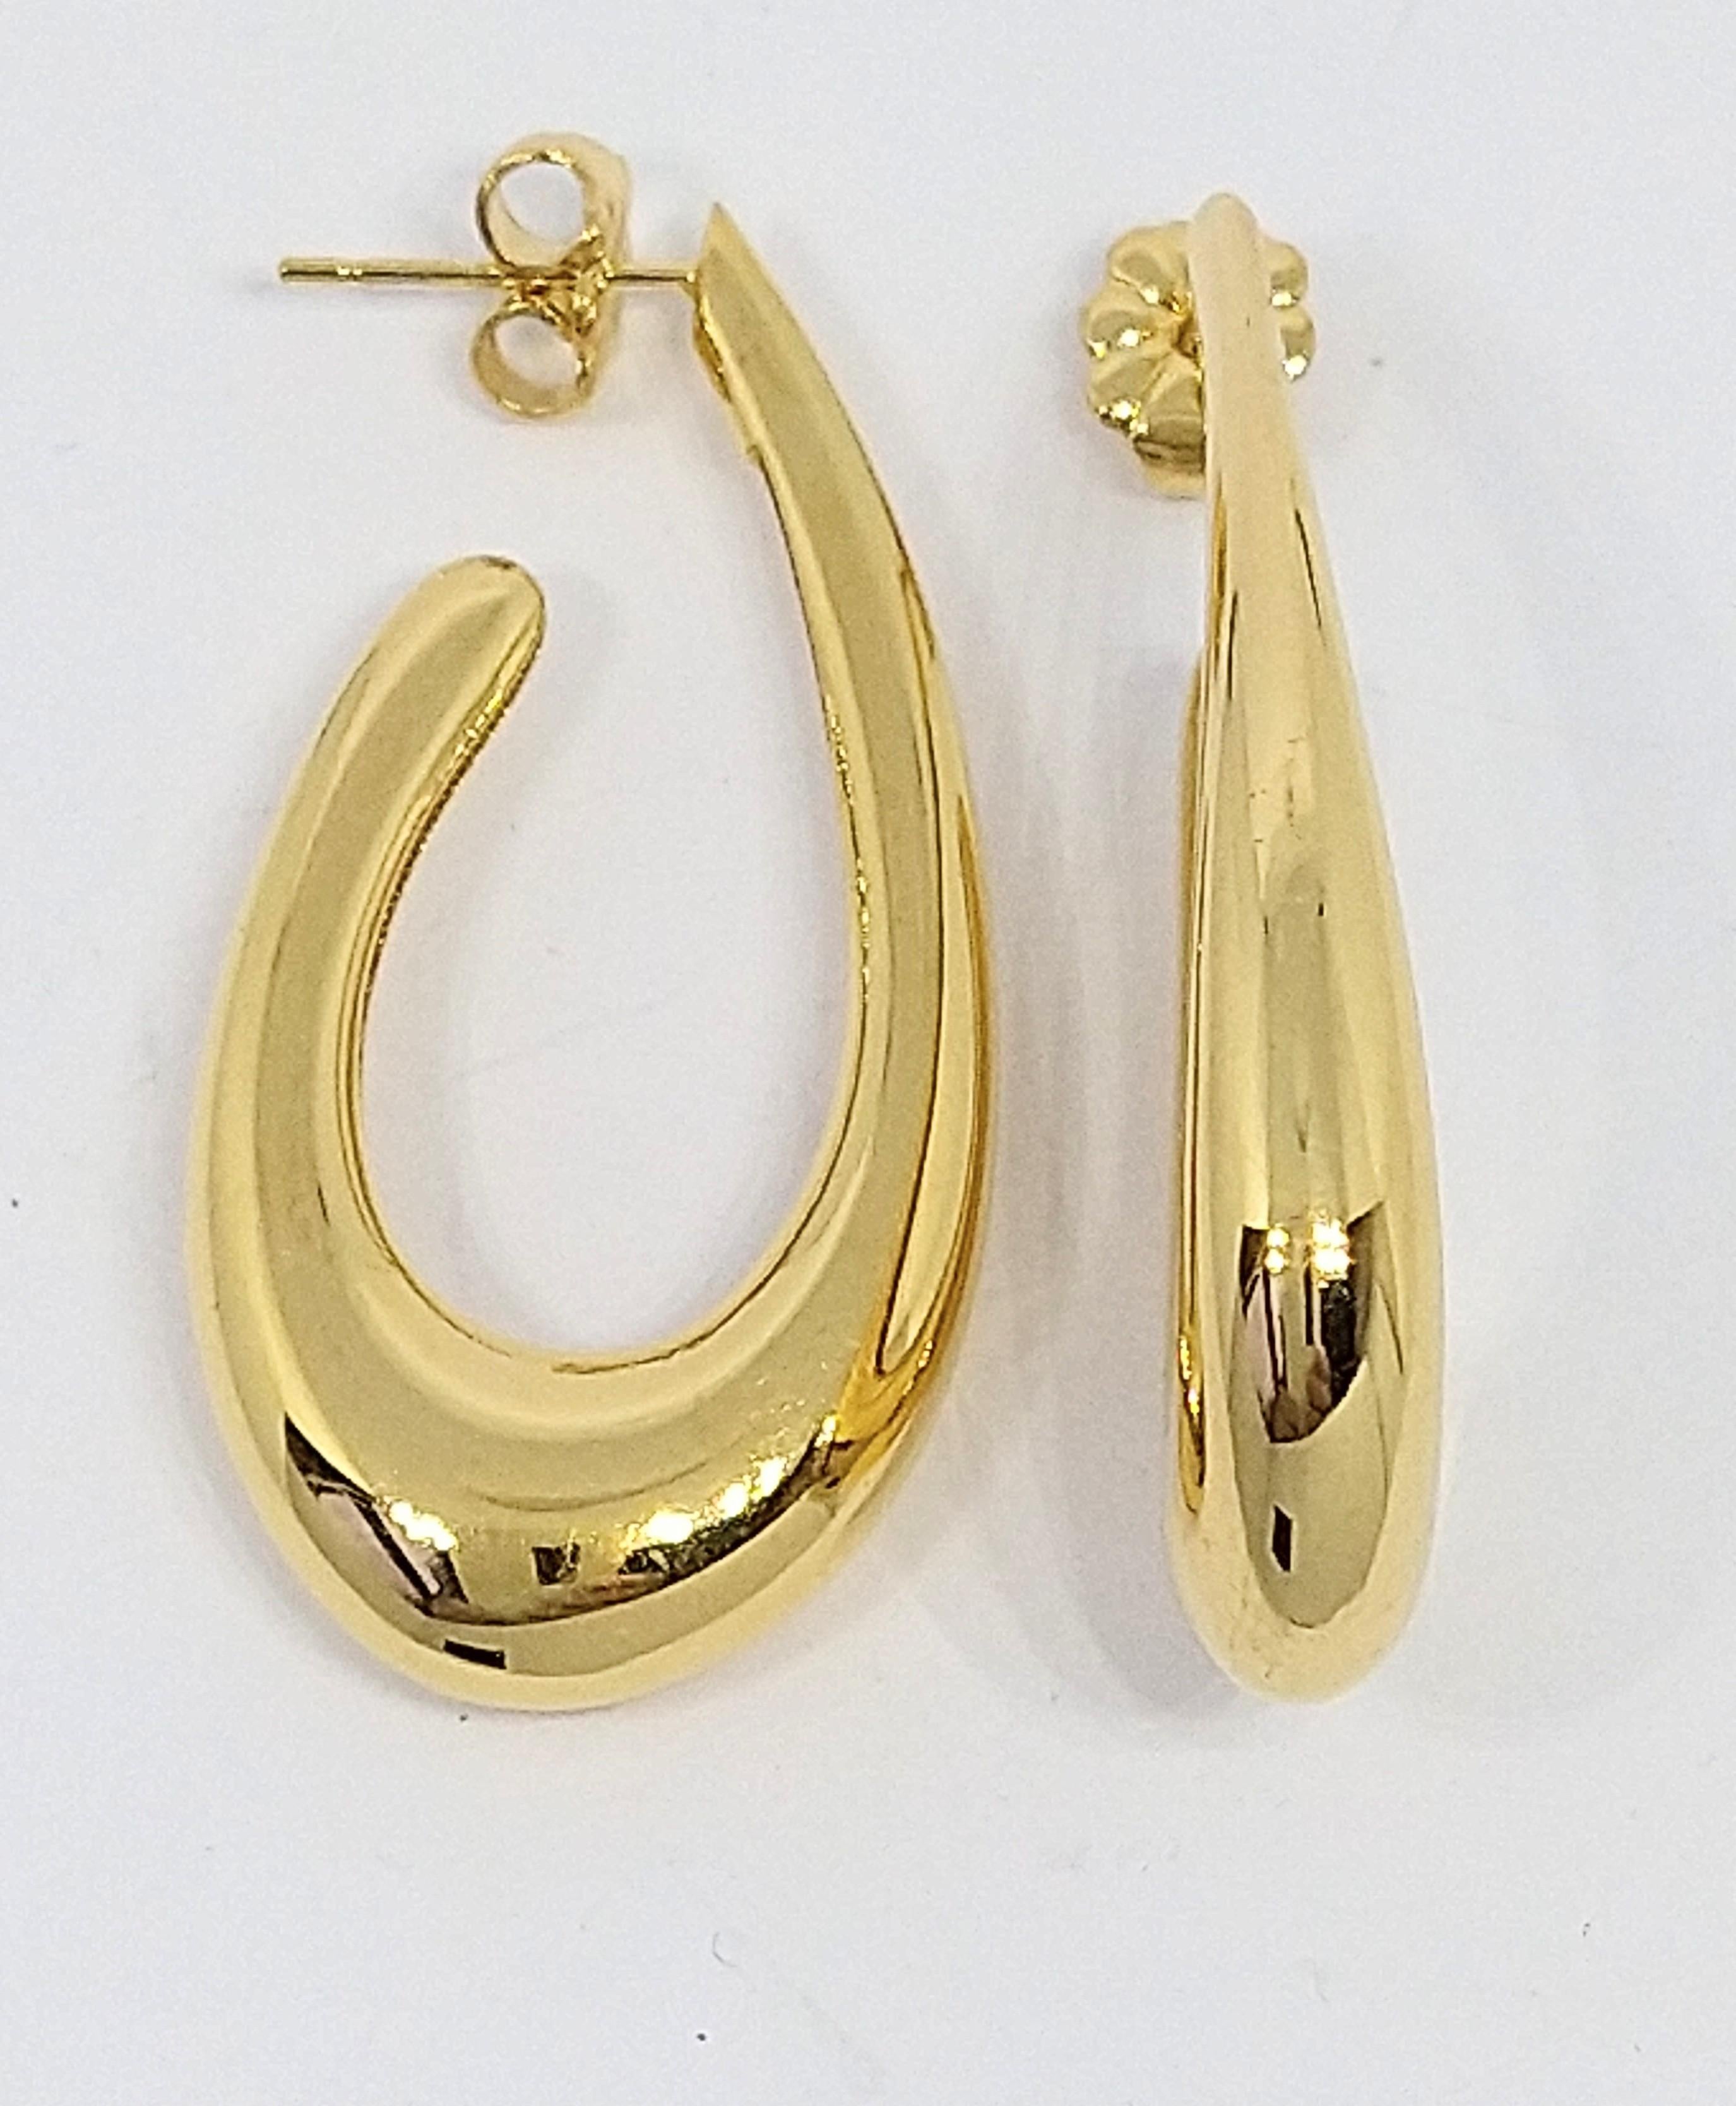 18 Karat Yellow Gold Vermeil Teardrop Hollow Hoop Earring,  1 5/16 inch high x 5/8 inch wide. From the Teardrop Series. Though the times we live in may get us down for a day or so, Beauty can come out of ashes. I found tears are probably occurring